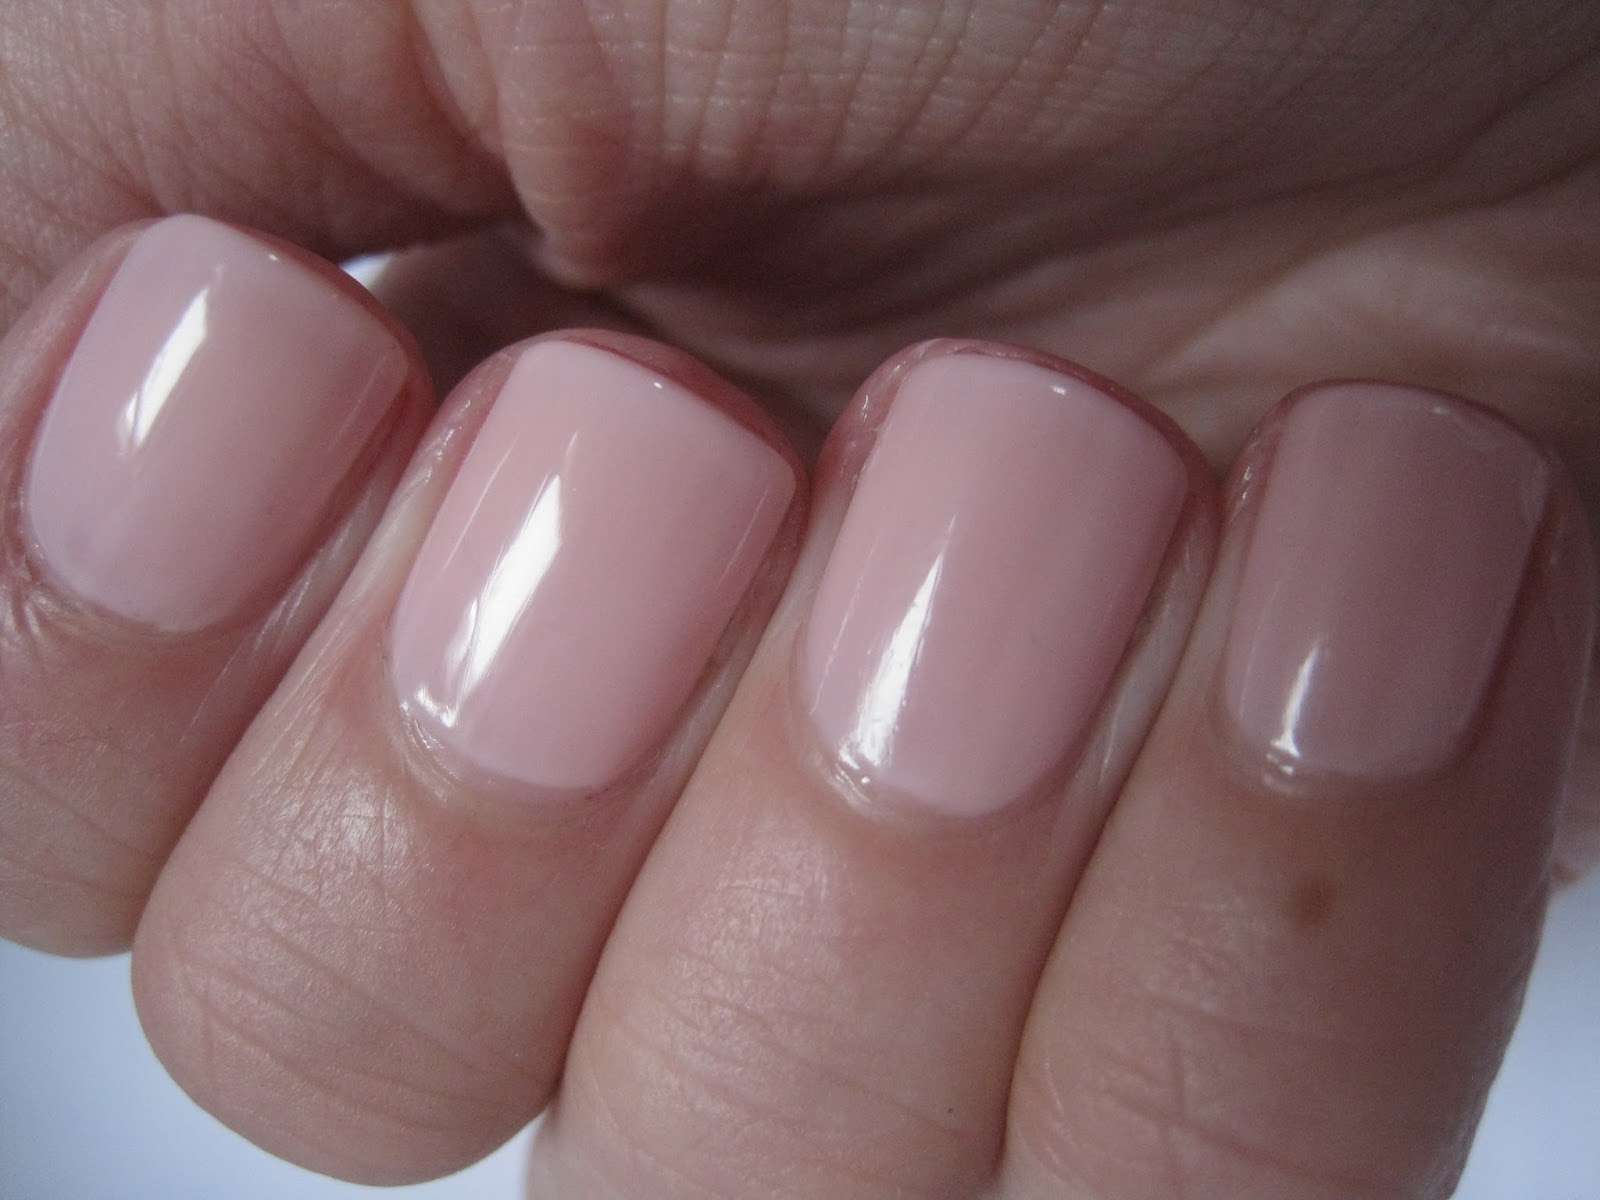 China Glaze Nail Lacquer in Innocence - wide 9